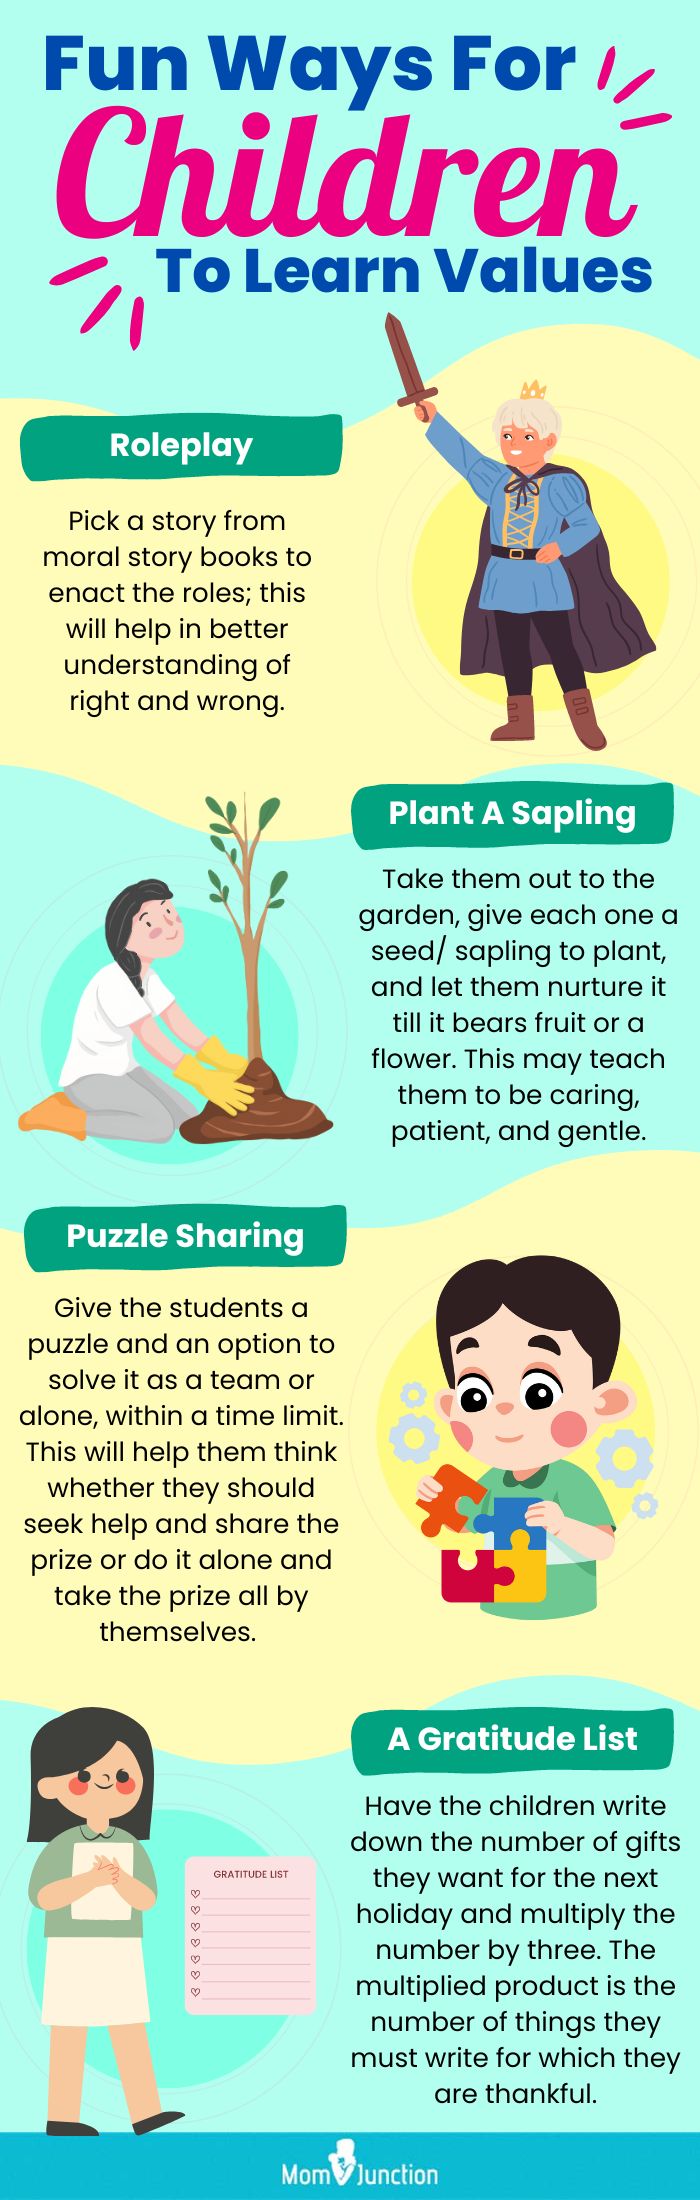 fun ways for children to learn values (infographic)